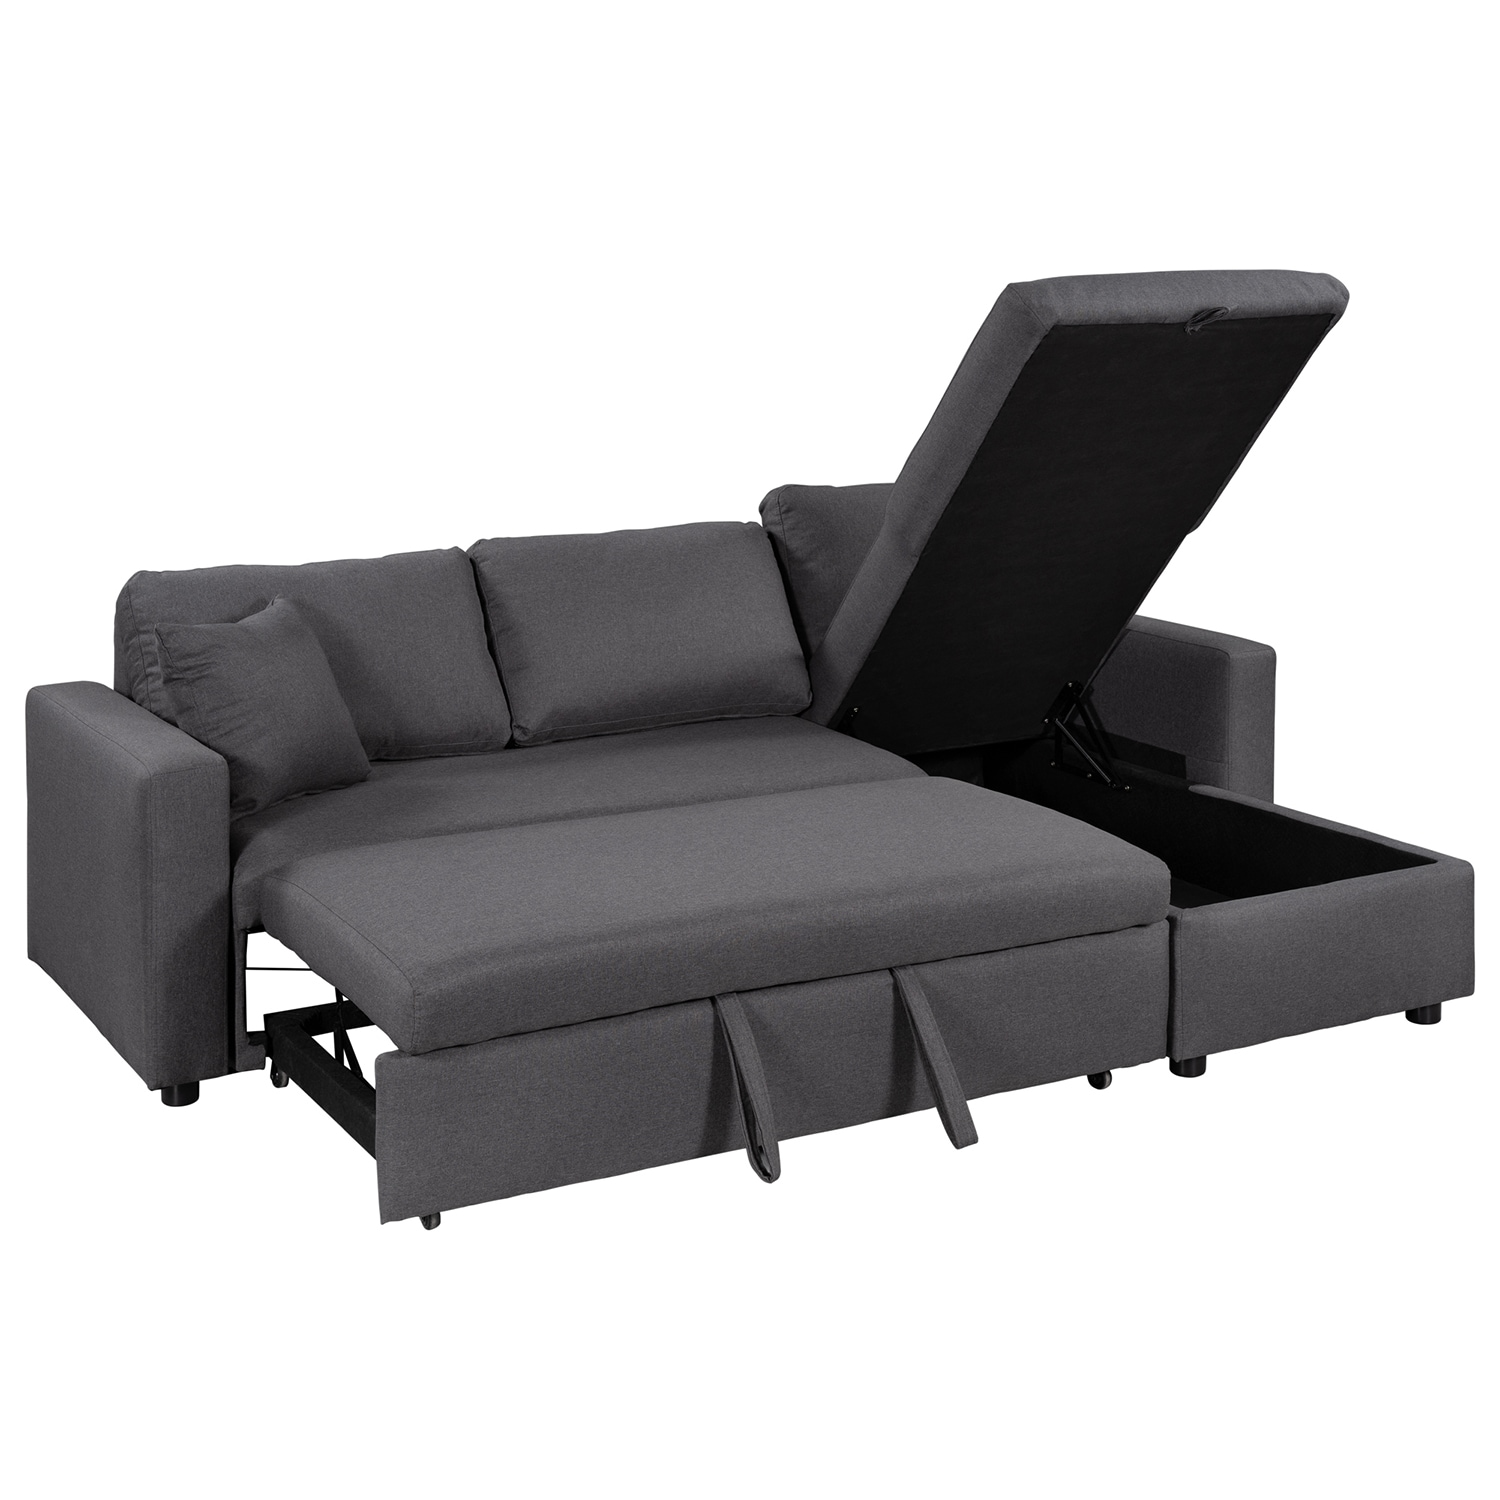 GZMR 87.4-in Modern Gray Polyester/Blend Sofa at Lowes.com